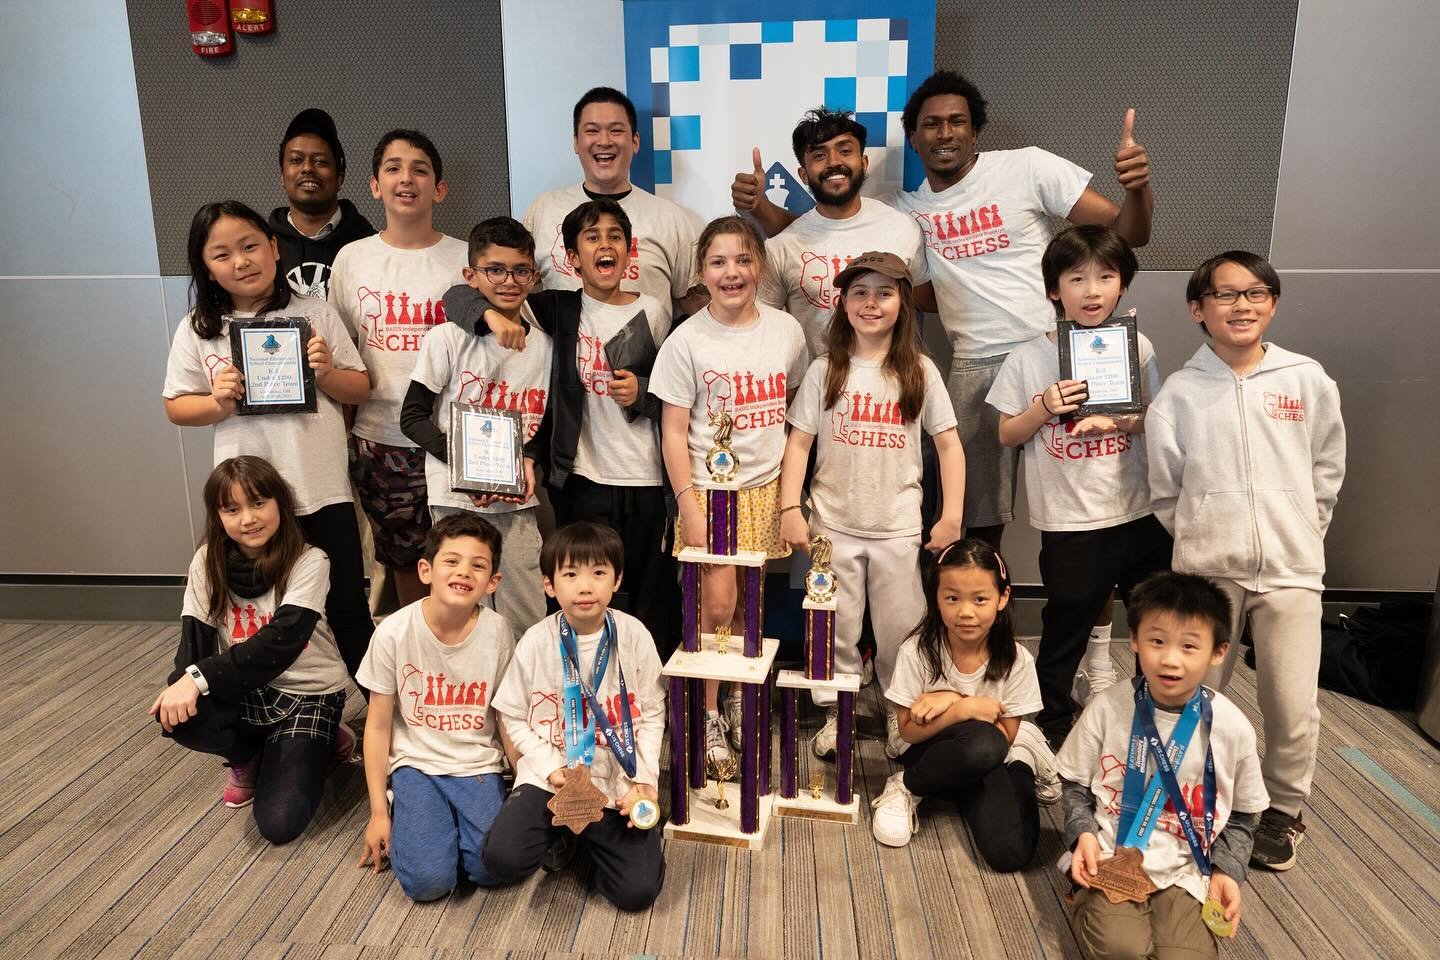 Congratulations to our BASIS Bears for their outstanding performance at the 2024 Elementary Nationals! They secured 2nd place in K5 U1200 as well as 7th place in K5 U900. Jonathan placed 4th individually with 6 points, Ziheng placed 18th with 5 point